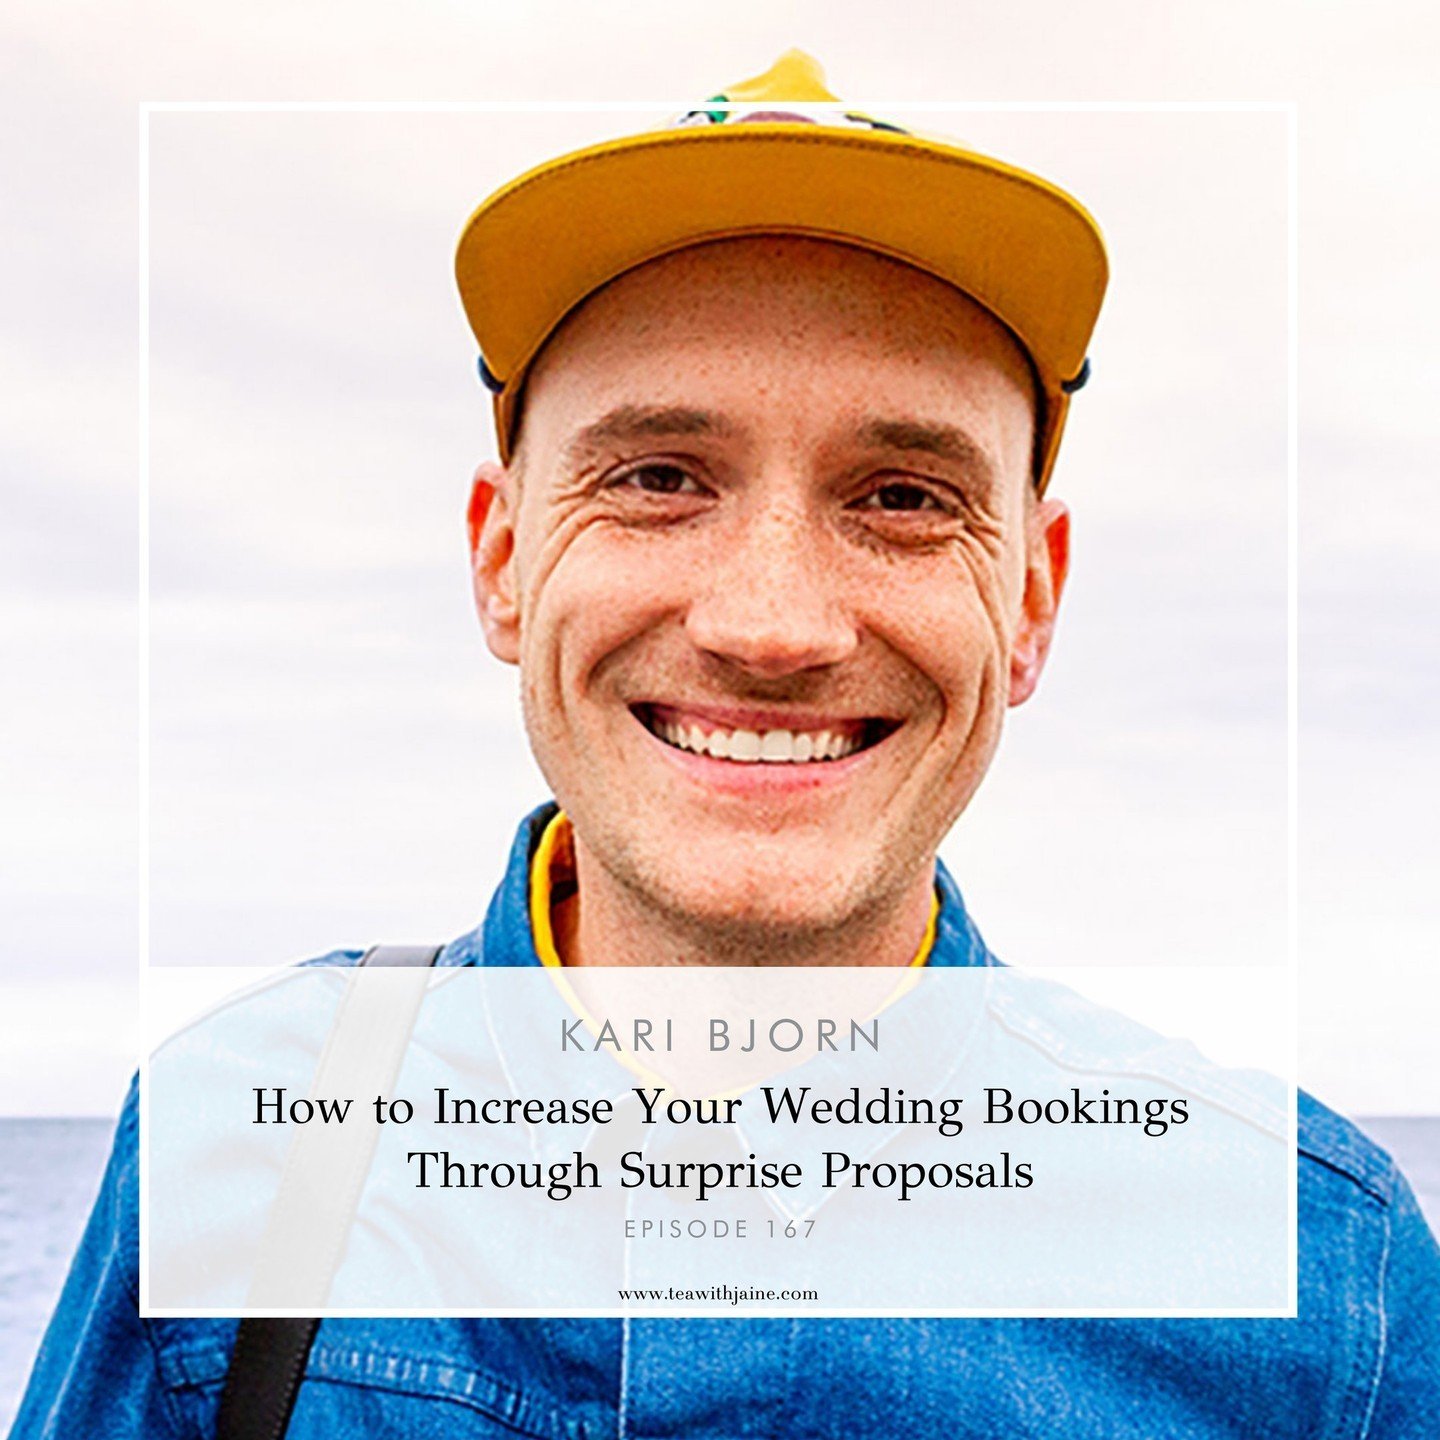 Looking to increase your bookings? Well today's podcast is for YOU! 🔗 LINK IN BIO⁠
⁠
I&rsquo;m so excited to chat with Kari Bjorn about this very topic. @karibjorn_  shares how he photographs surprise proposals to increase his annual income and book